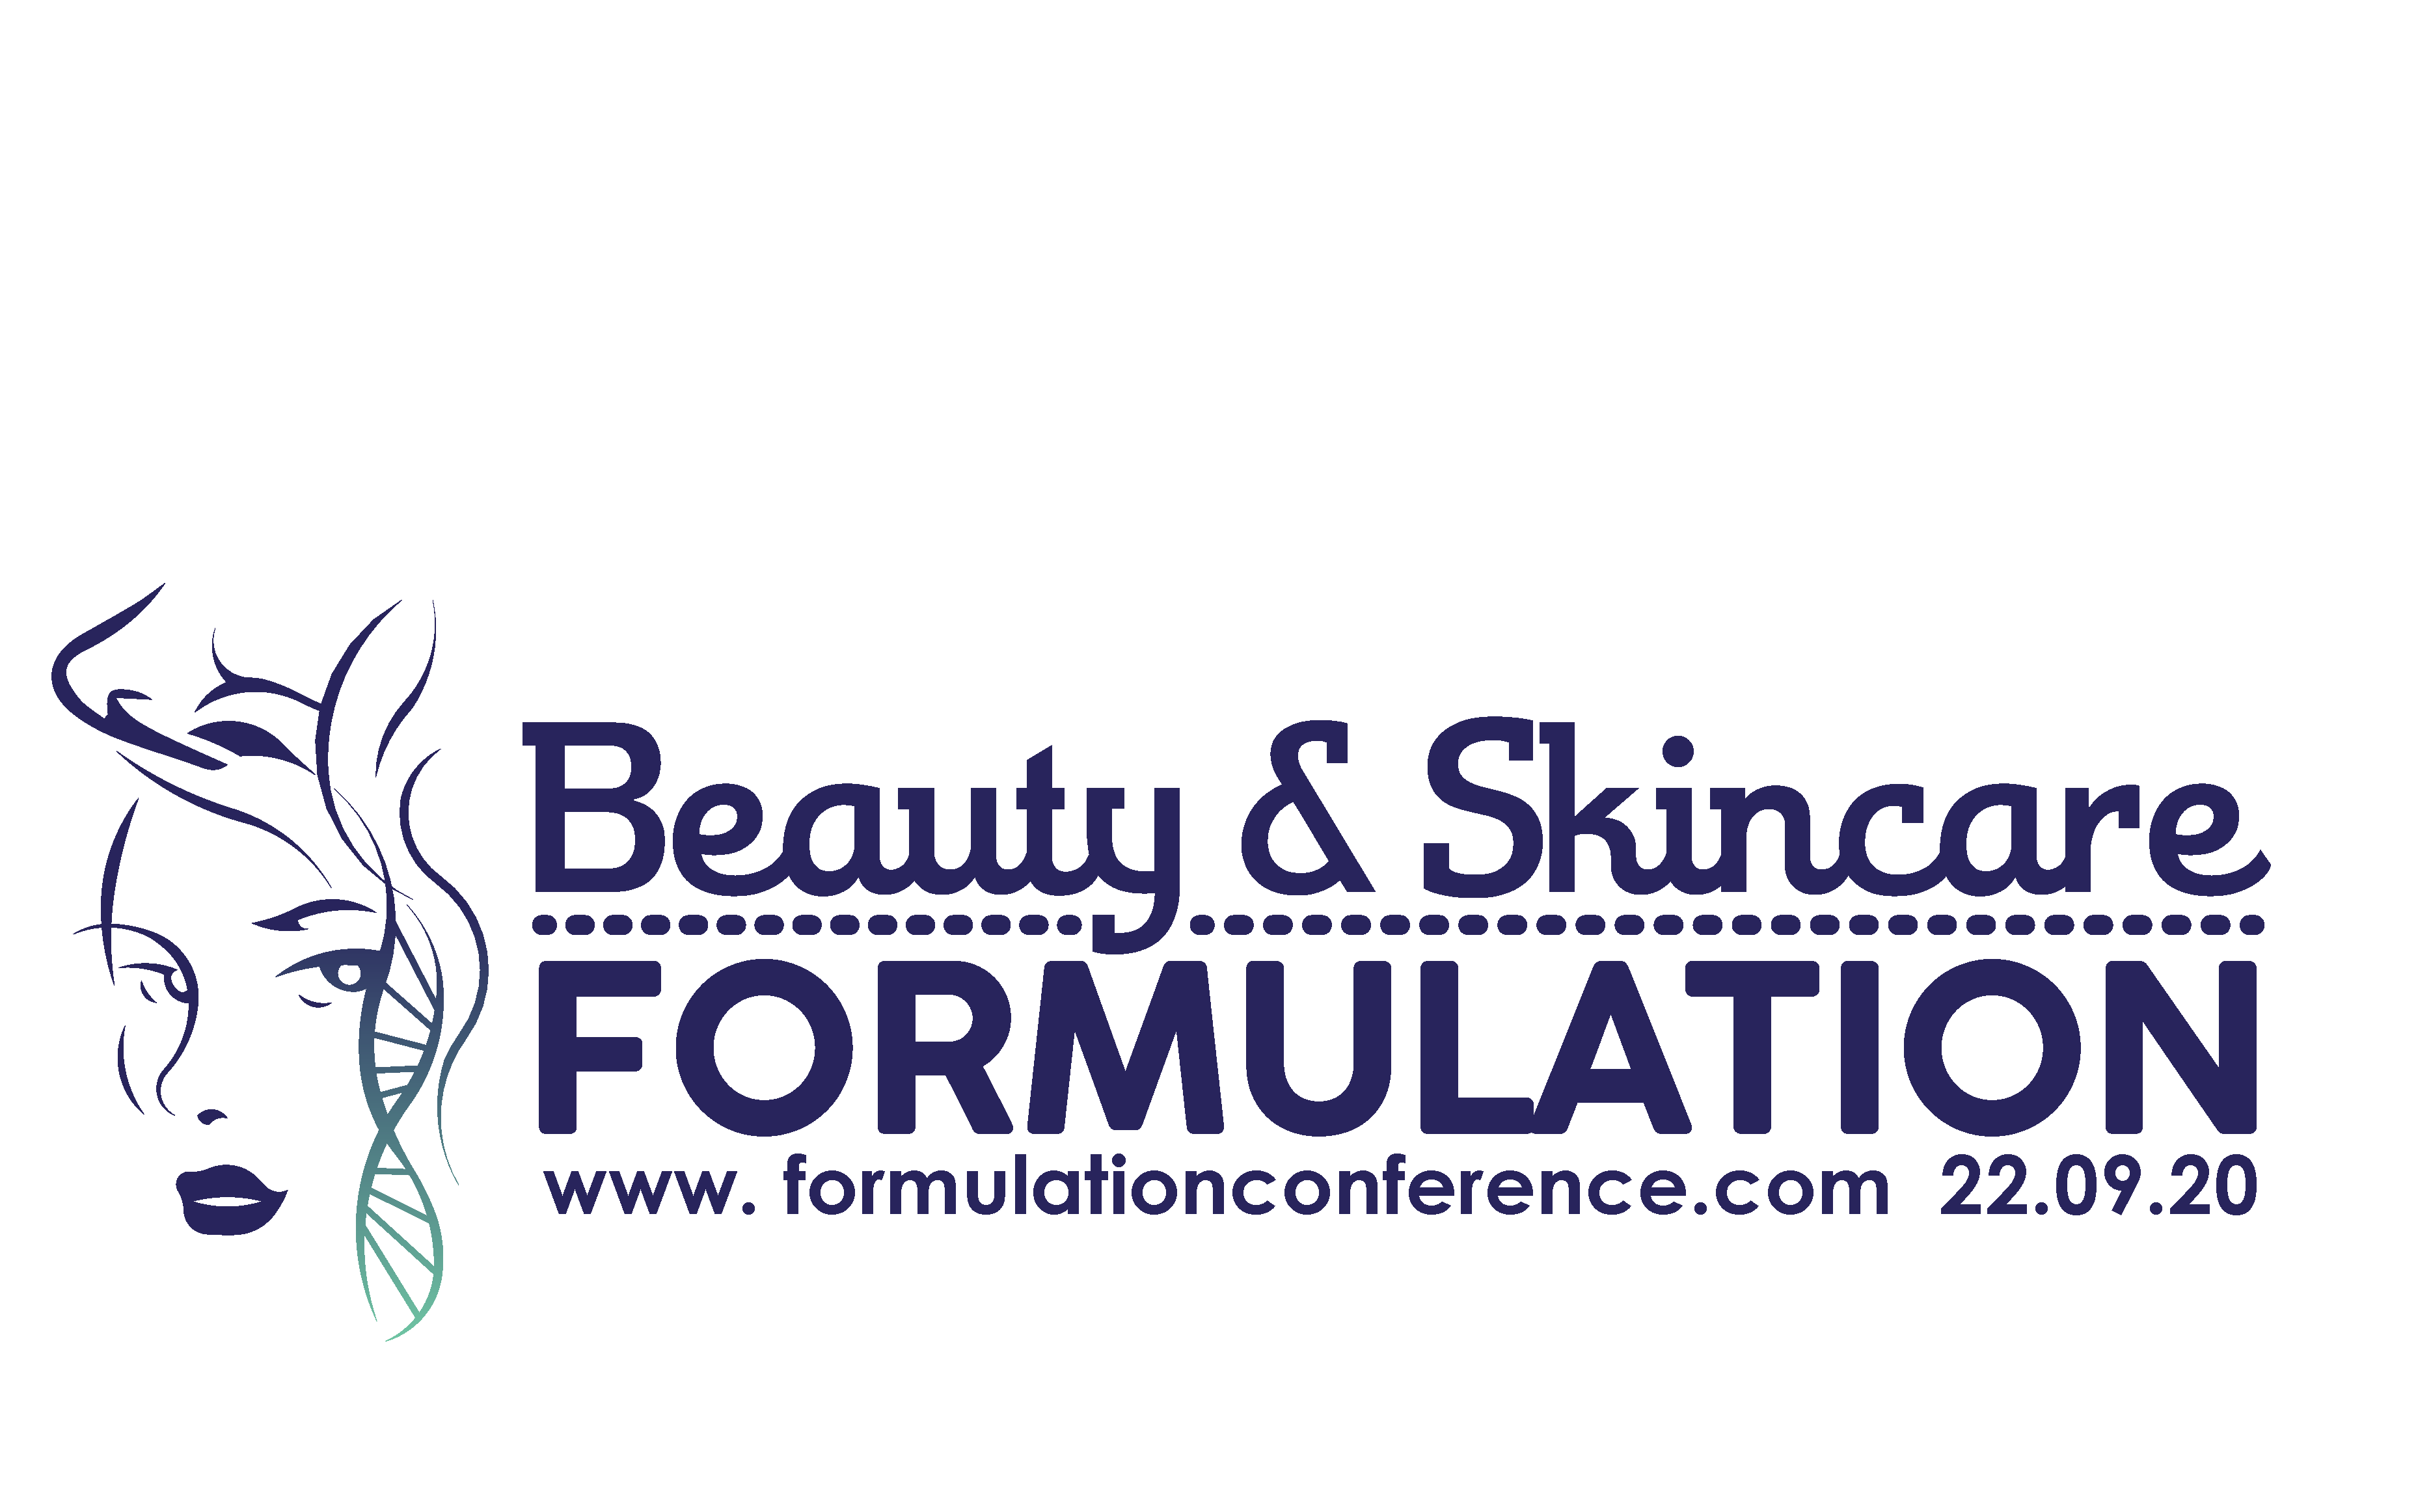 The Beauty & Skincare Formulation Conference - CARISCOS